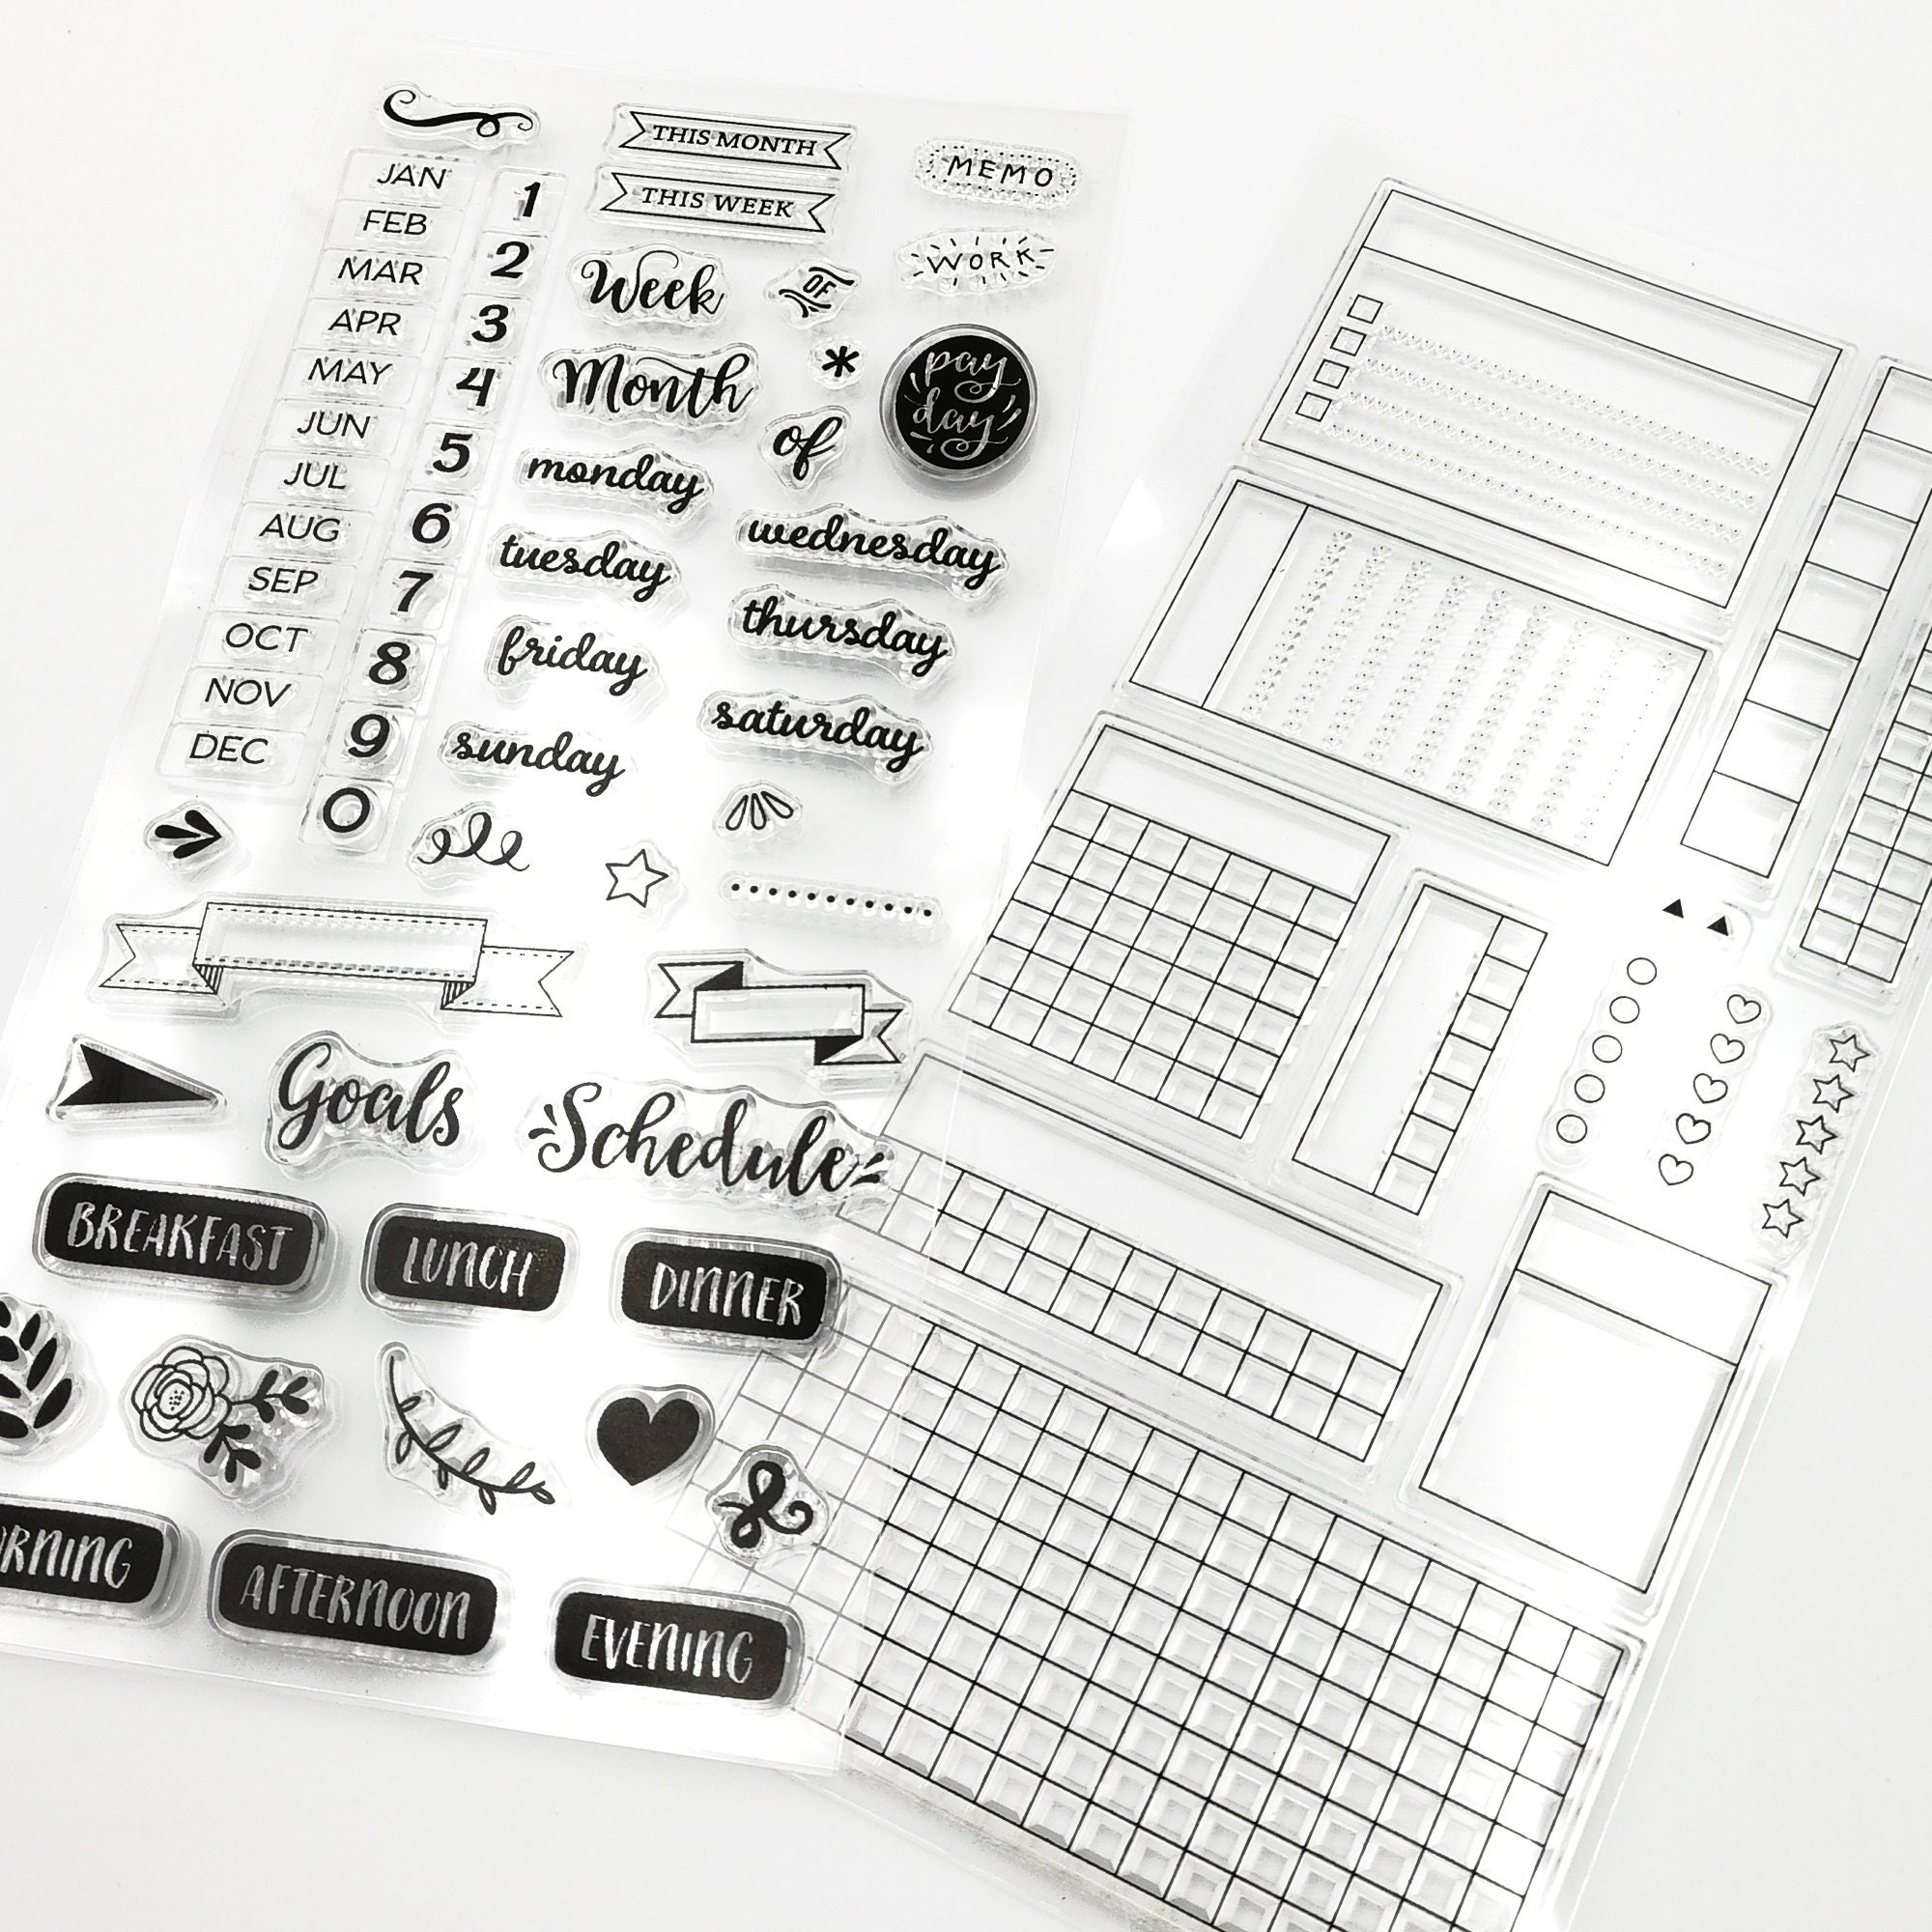 Calendar Stamp, Clear Transparent Stamp, Rubber Stamp, Planner Journal  Accessories, Journal Kit, Week, Day, Month, Numbers, Days of Week 